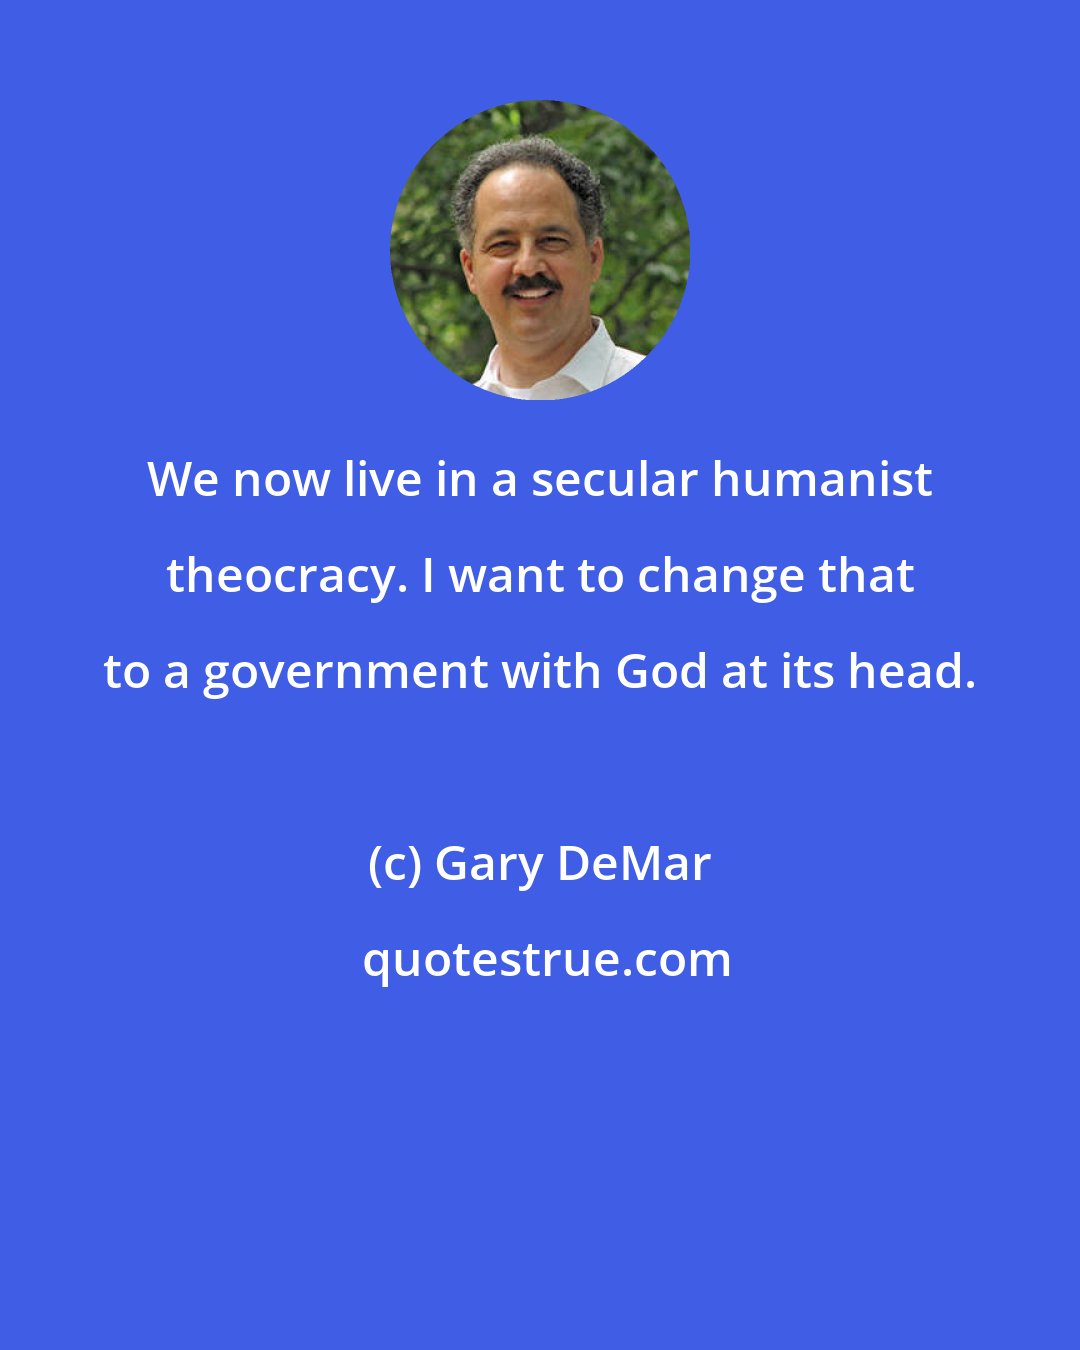 Gary DeMar: We now live in a secular humanist theocracy. I want to change that to a government with God at its head.